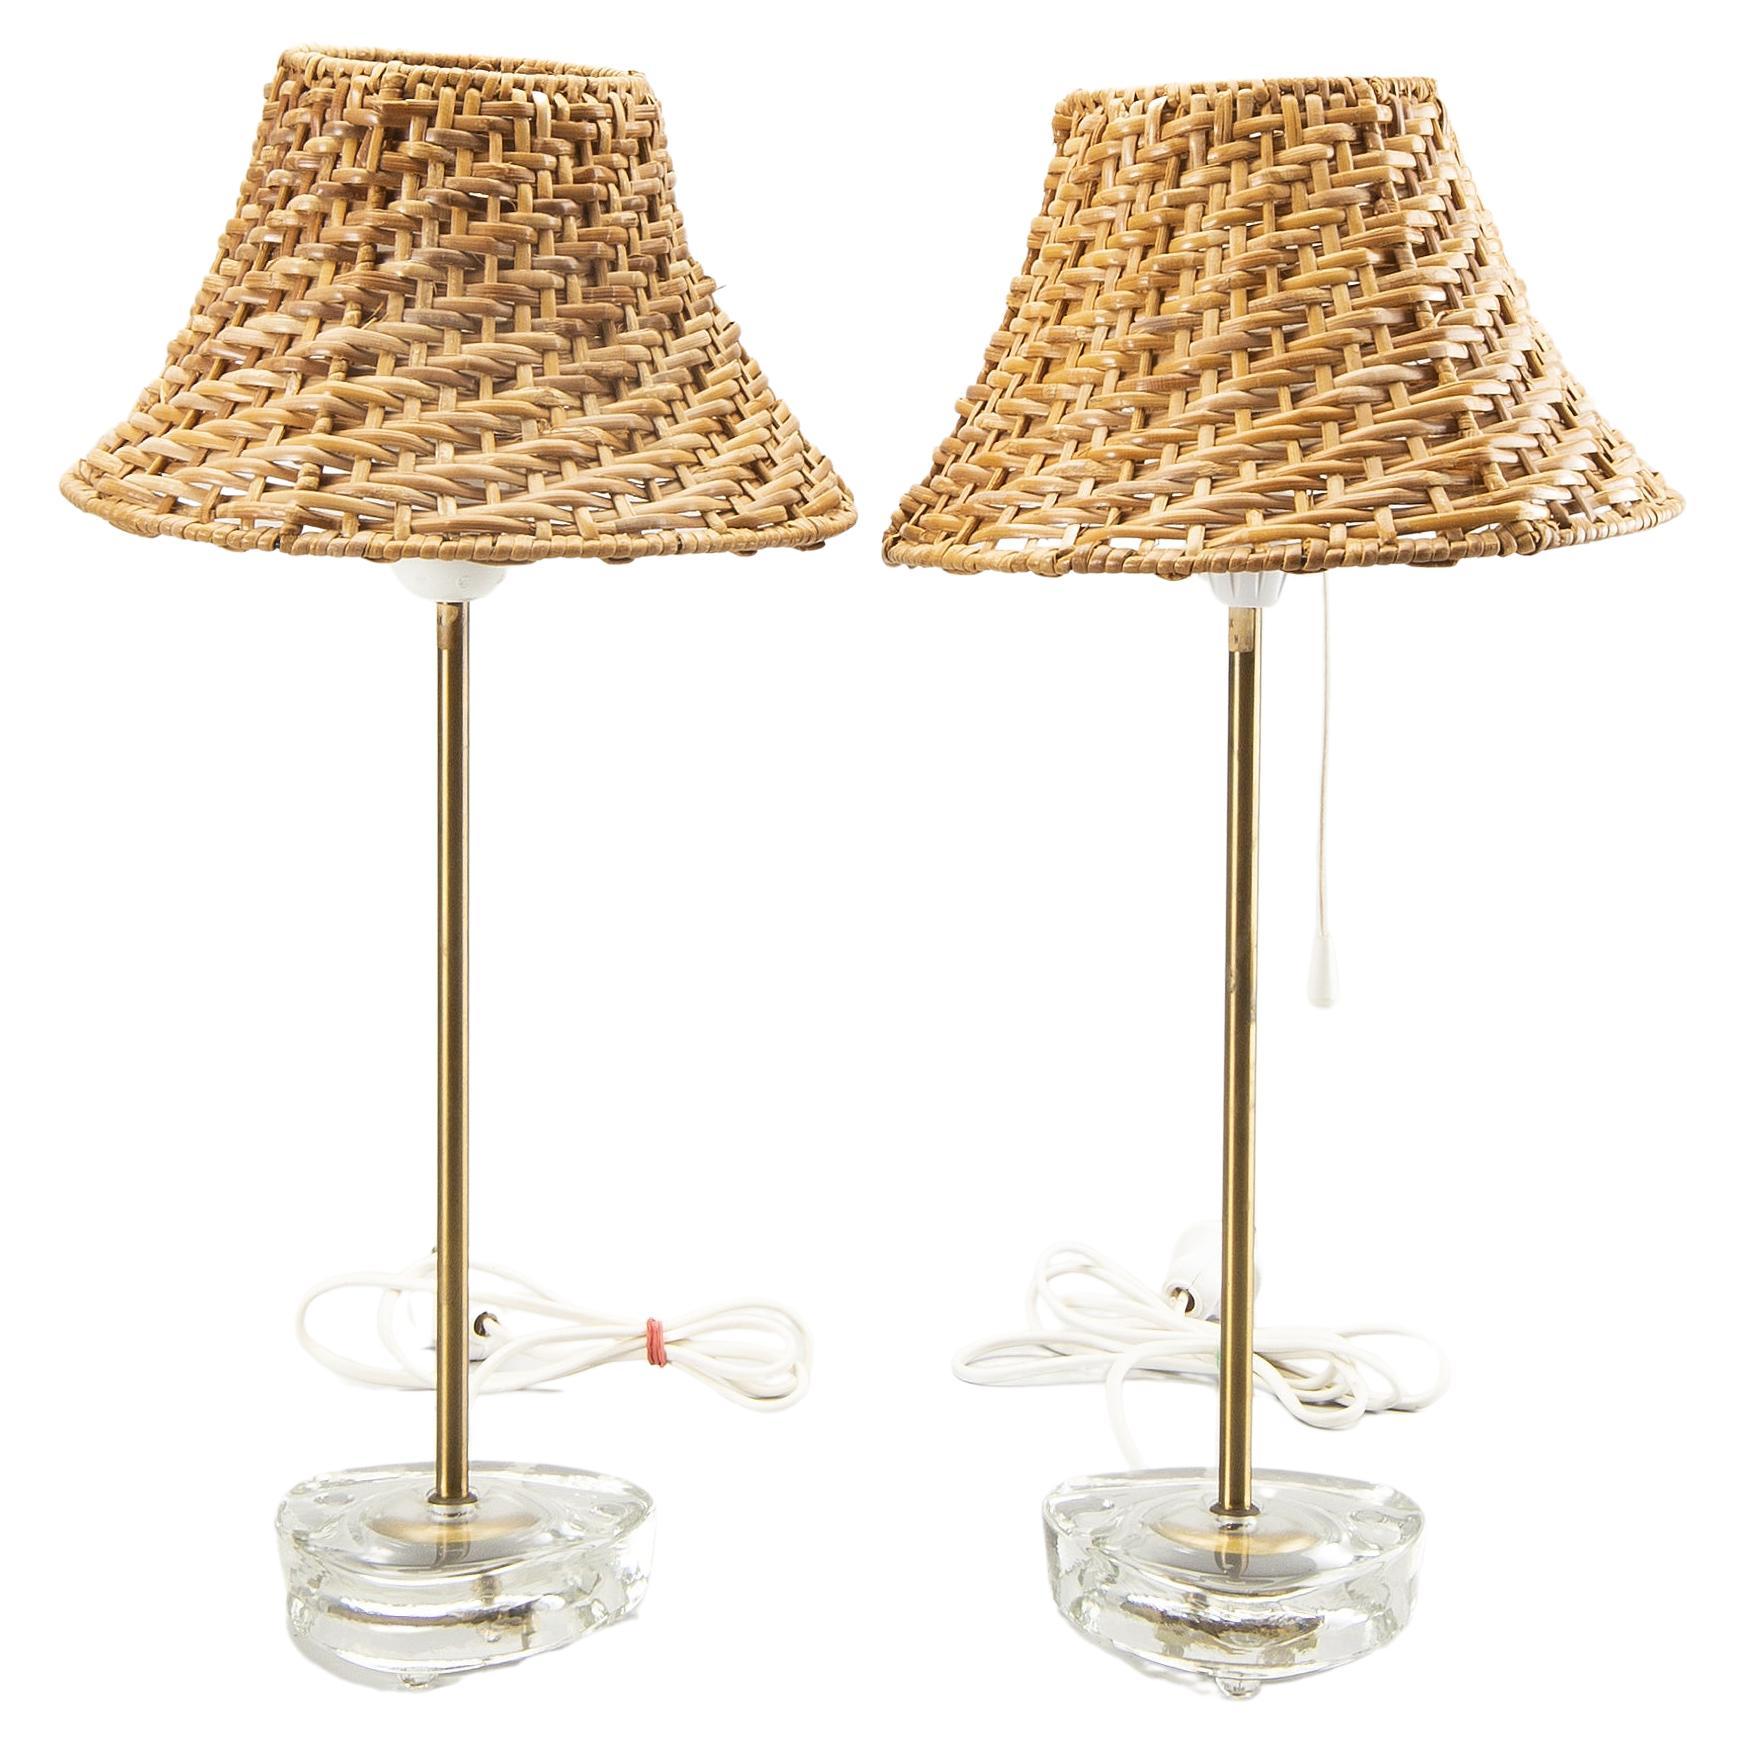 Boréns Boras table Lamps Glass with original straw shade Sweden 1960